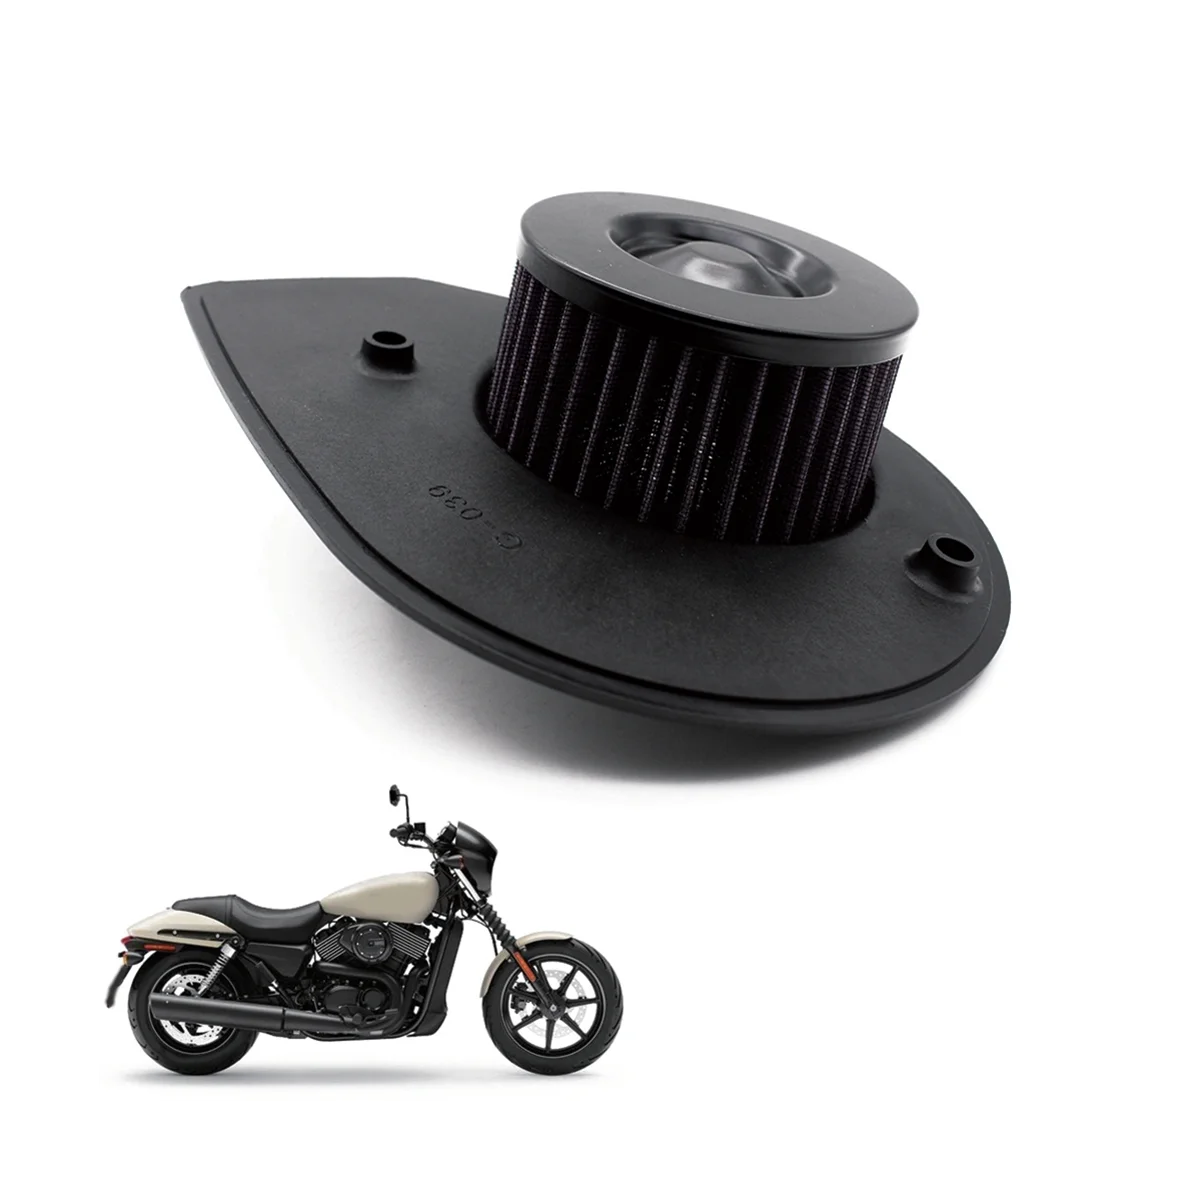 

Motorcycle High Flow Air Filter Elements Style Filter for XG750 Street750 XG500 HD-4915